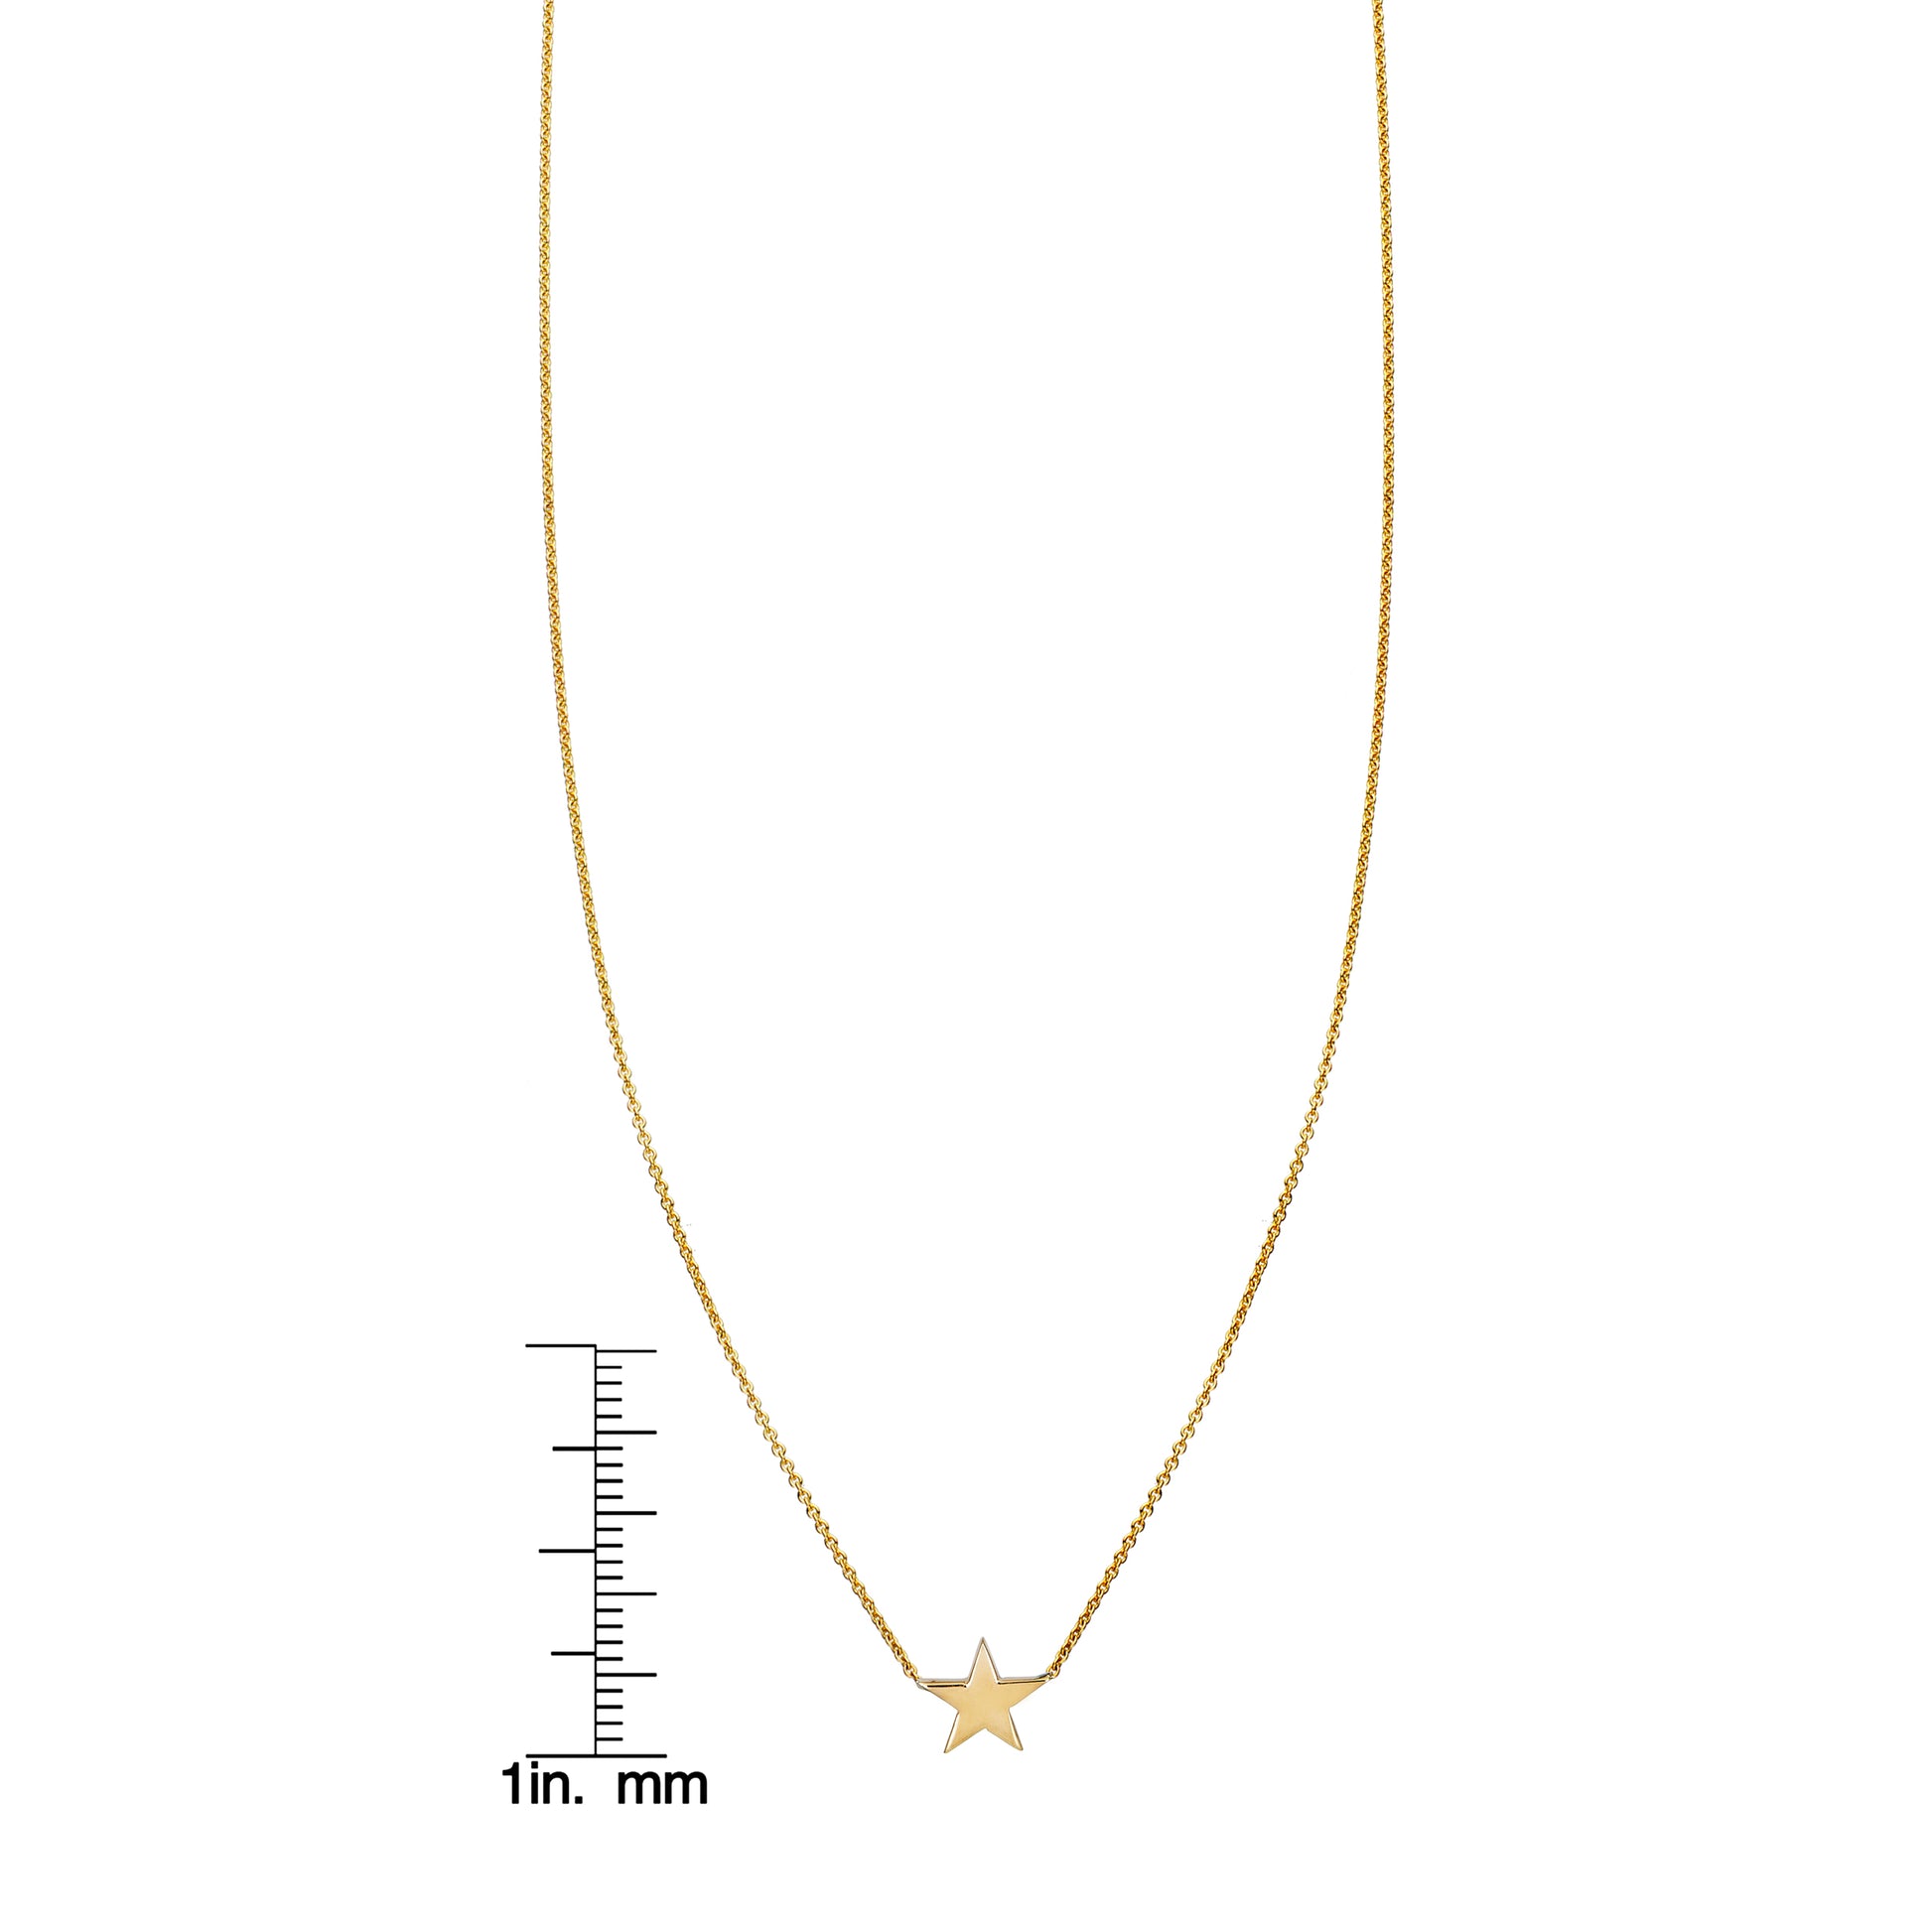 large gold star necklace with ruler